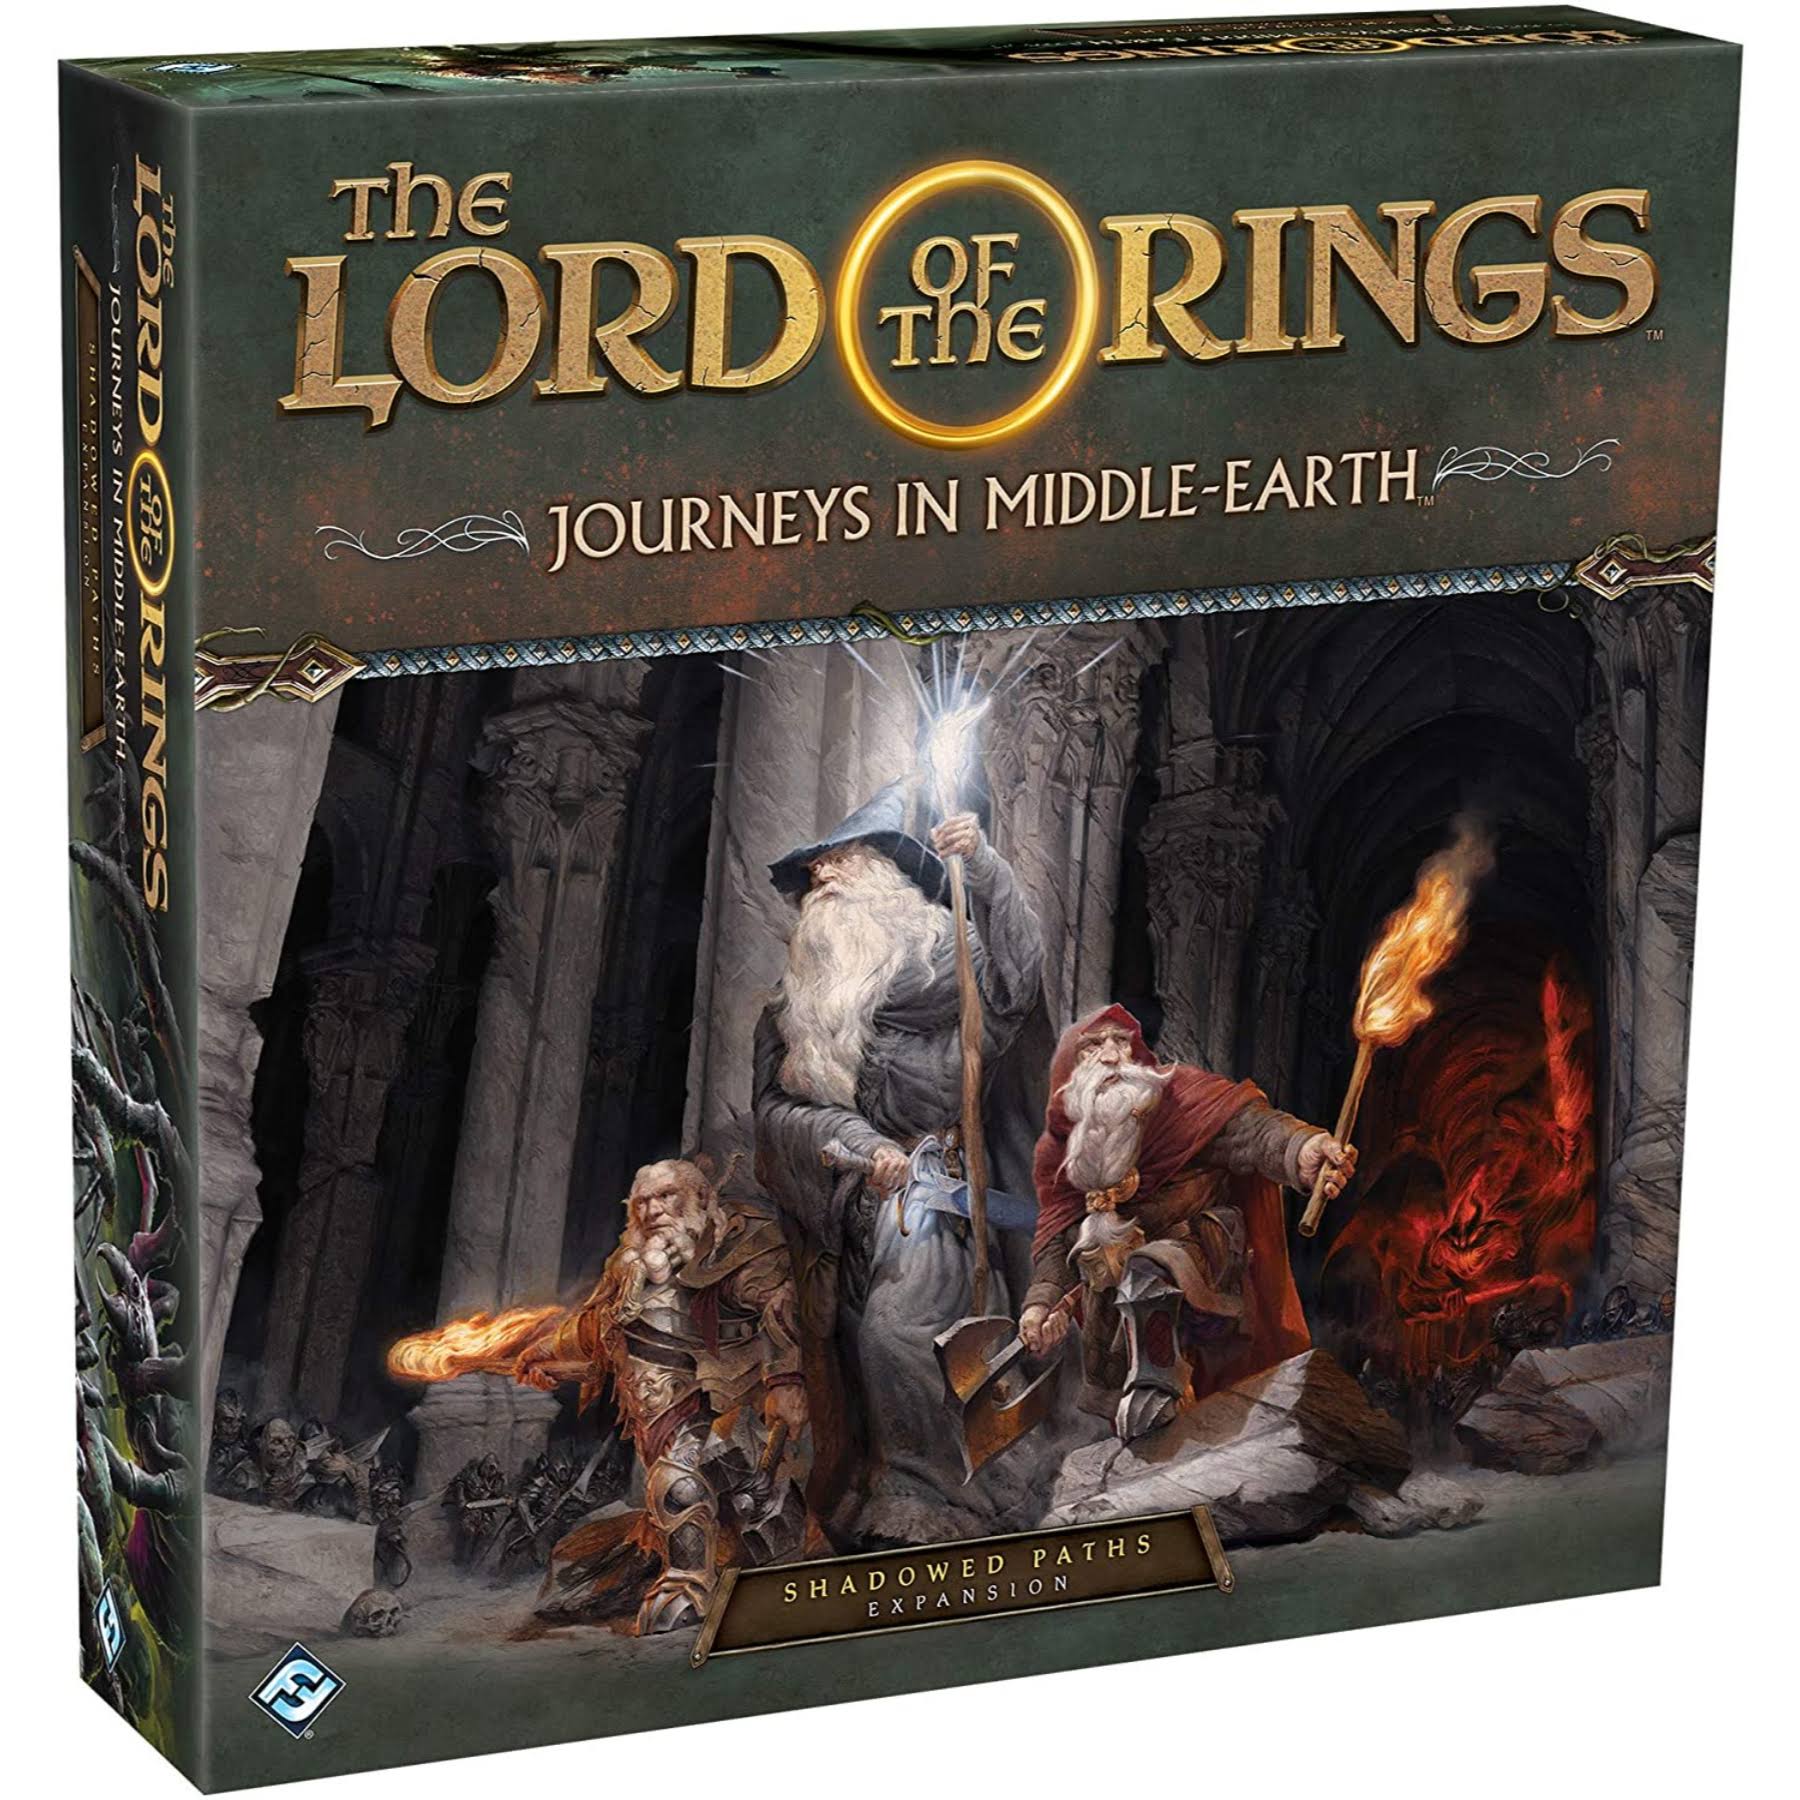 The Lord of The Rings - Journeys in Middle - Earth Shadowed Paths Expansion